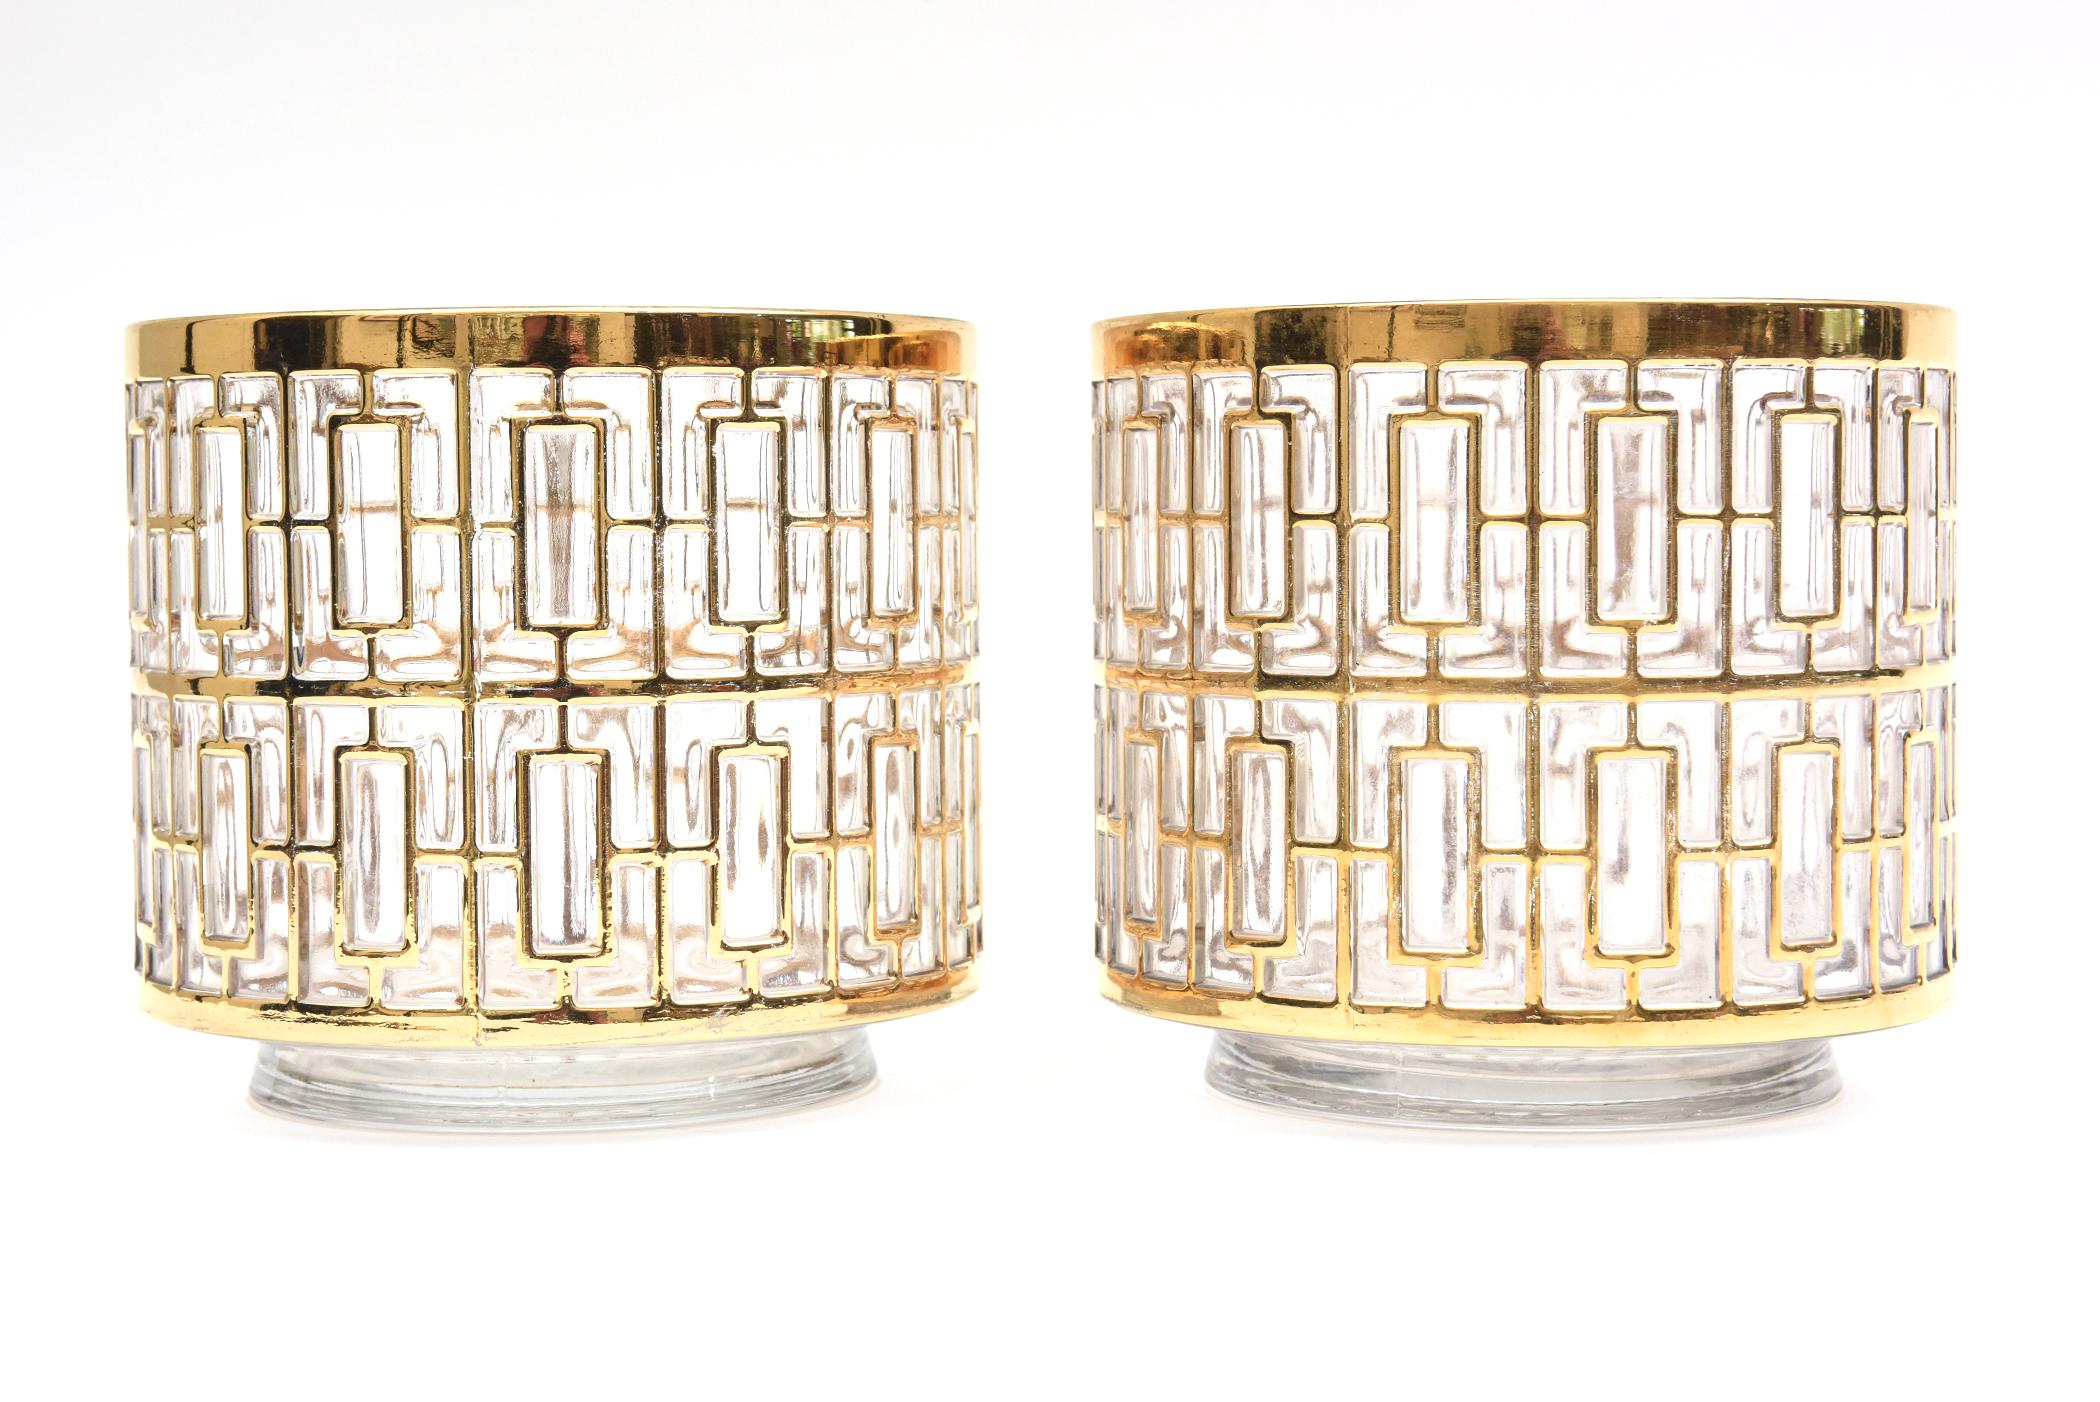 This pair of elegant vintage Imperial Glass Co. ice buckets have the iconic and collected 22 carat gold overlay over glass called the Shoji or greek key or trellis design. These are from the 60's and have the IG marking on the bottom. These are